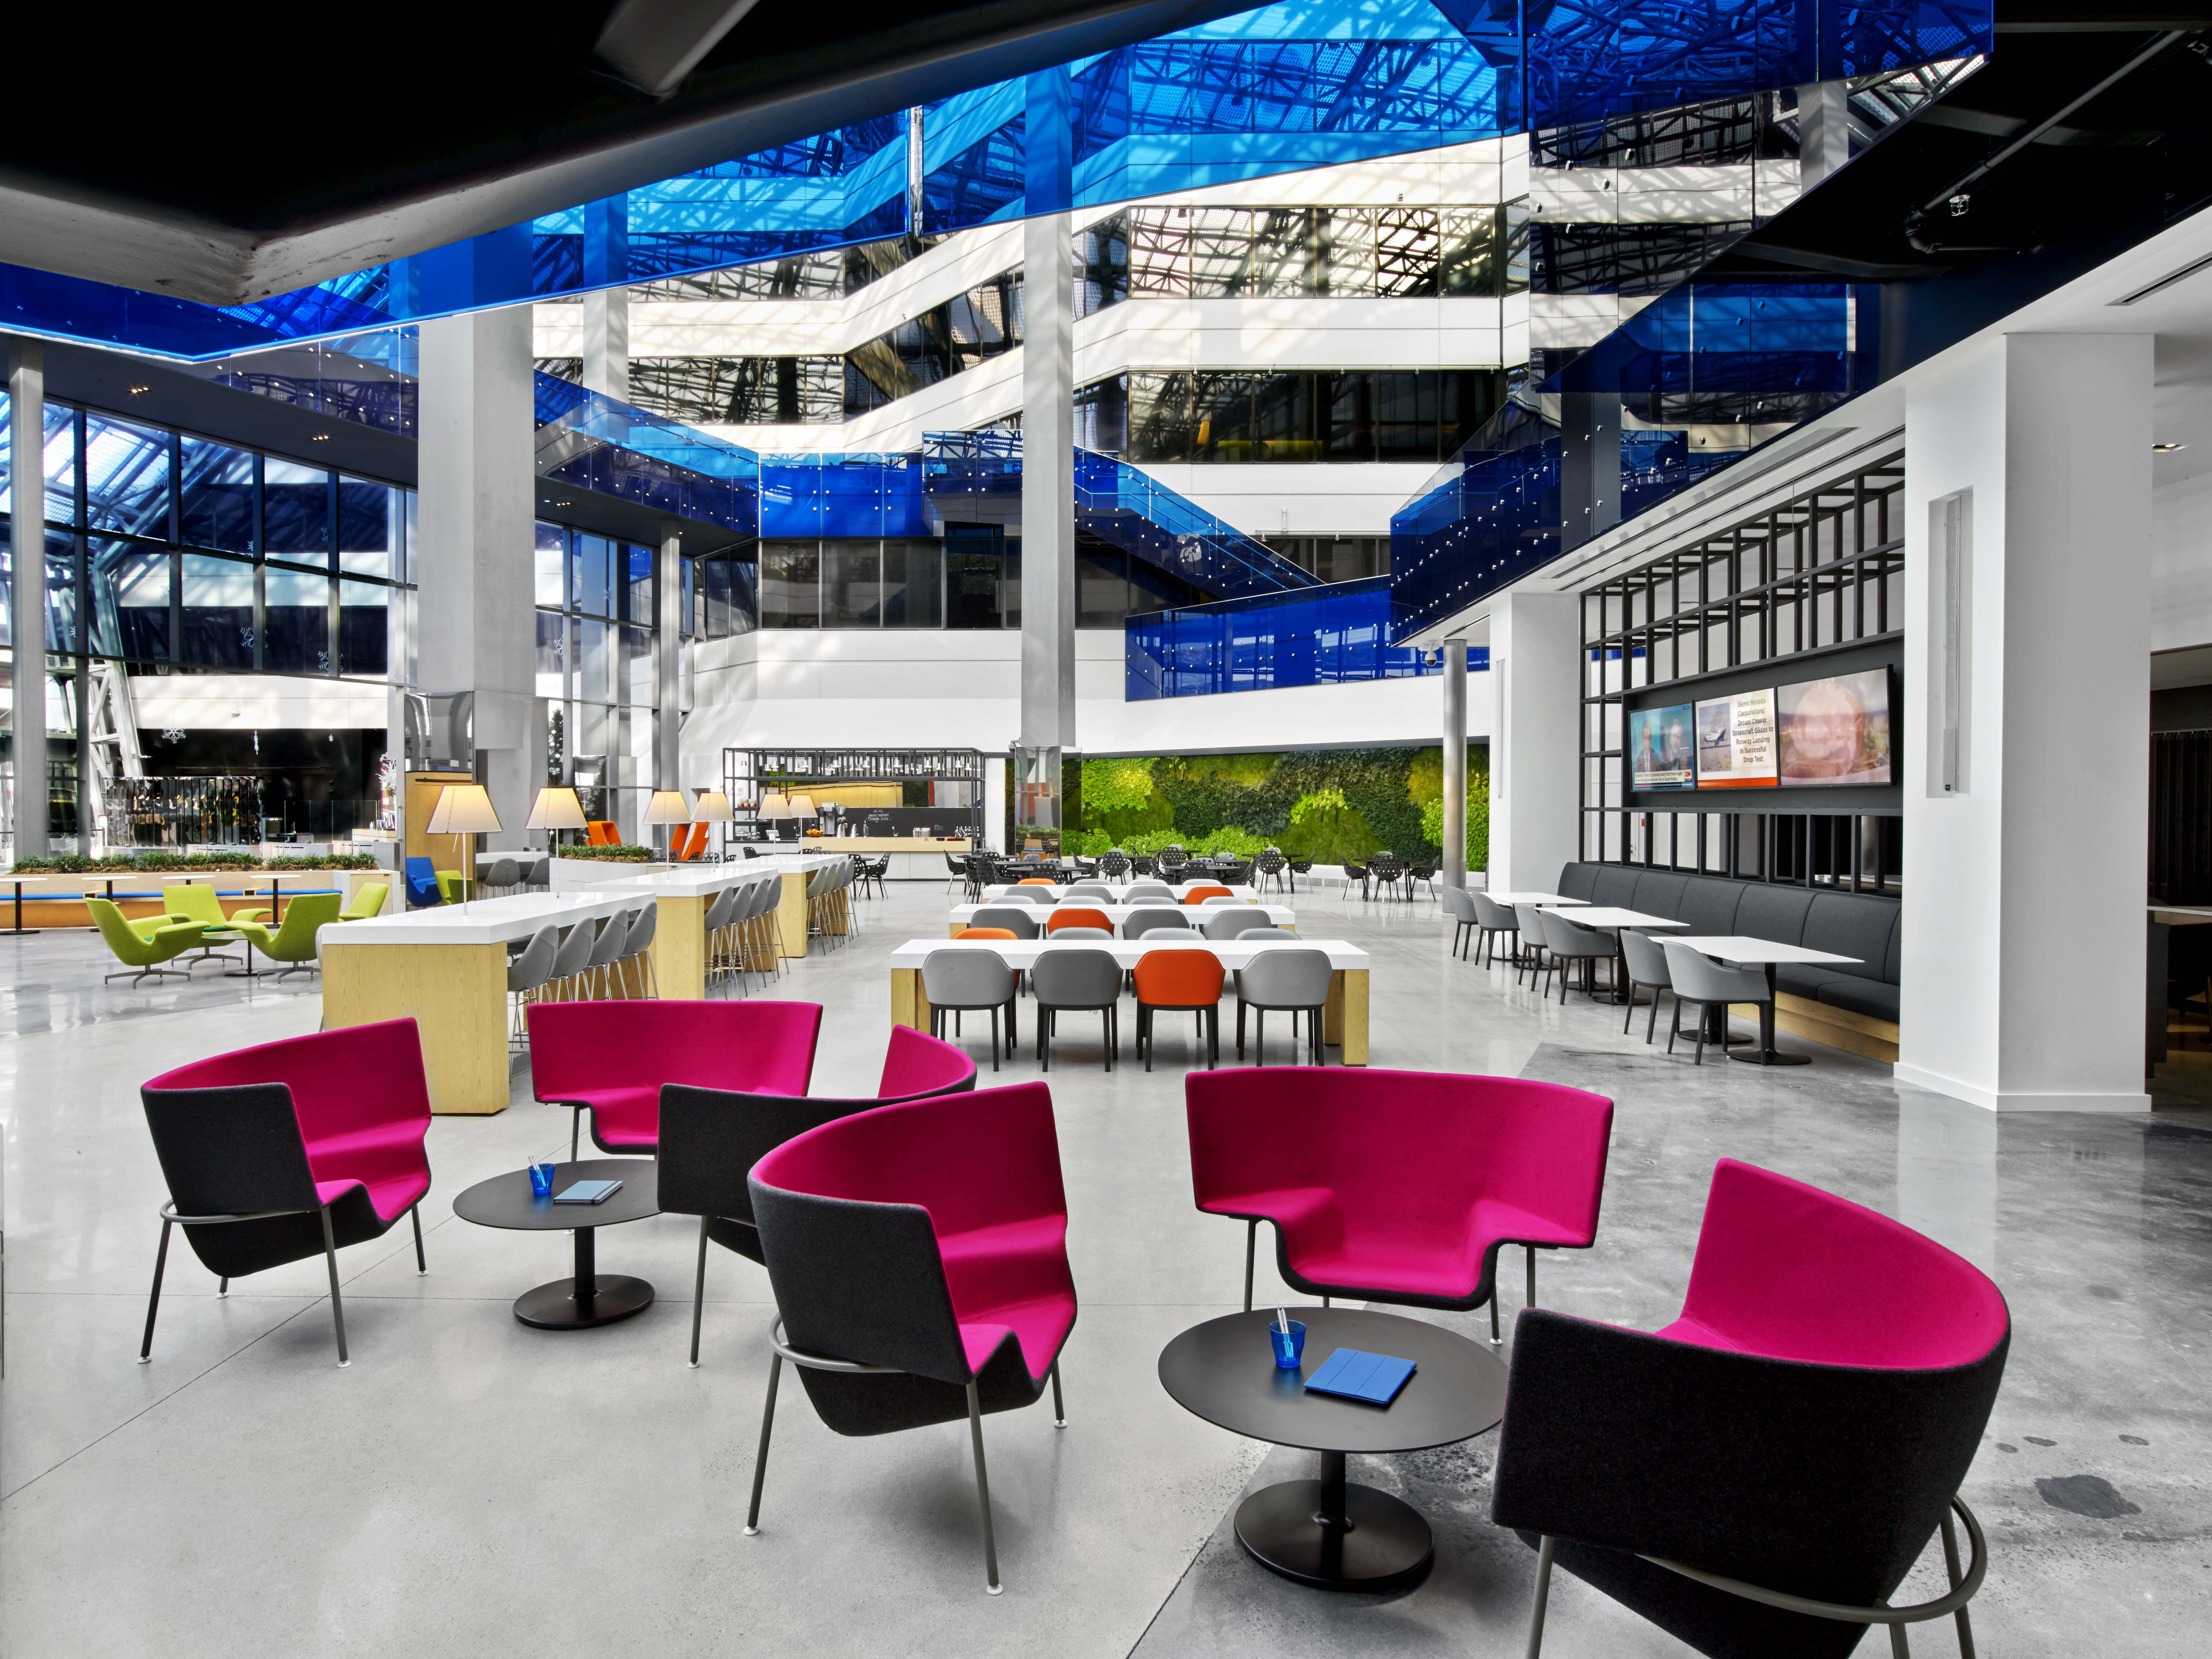 A wide-angle view of the atrium provides a glimpse at the variety of seating and design choices that can be used to elevate a space. Throughout the building, technology is integrated seamlessly into the design to support communication and productivity.